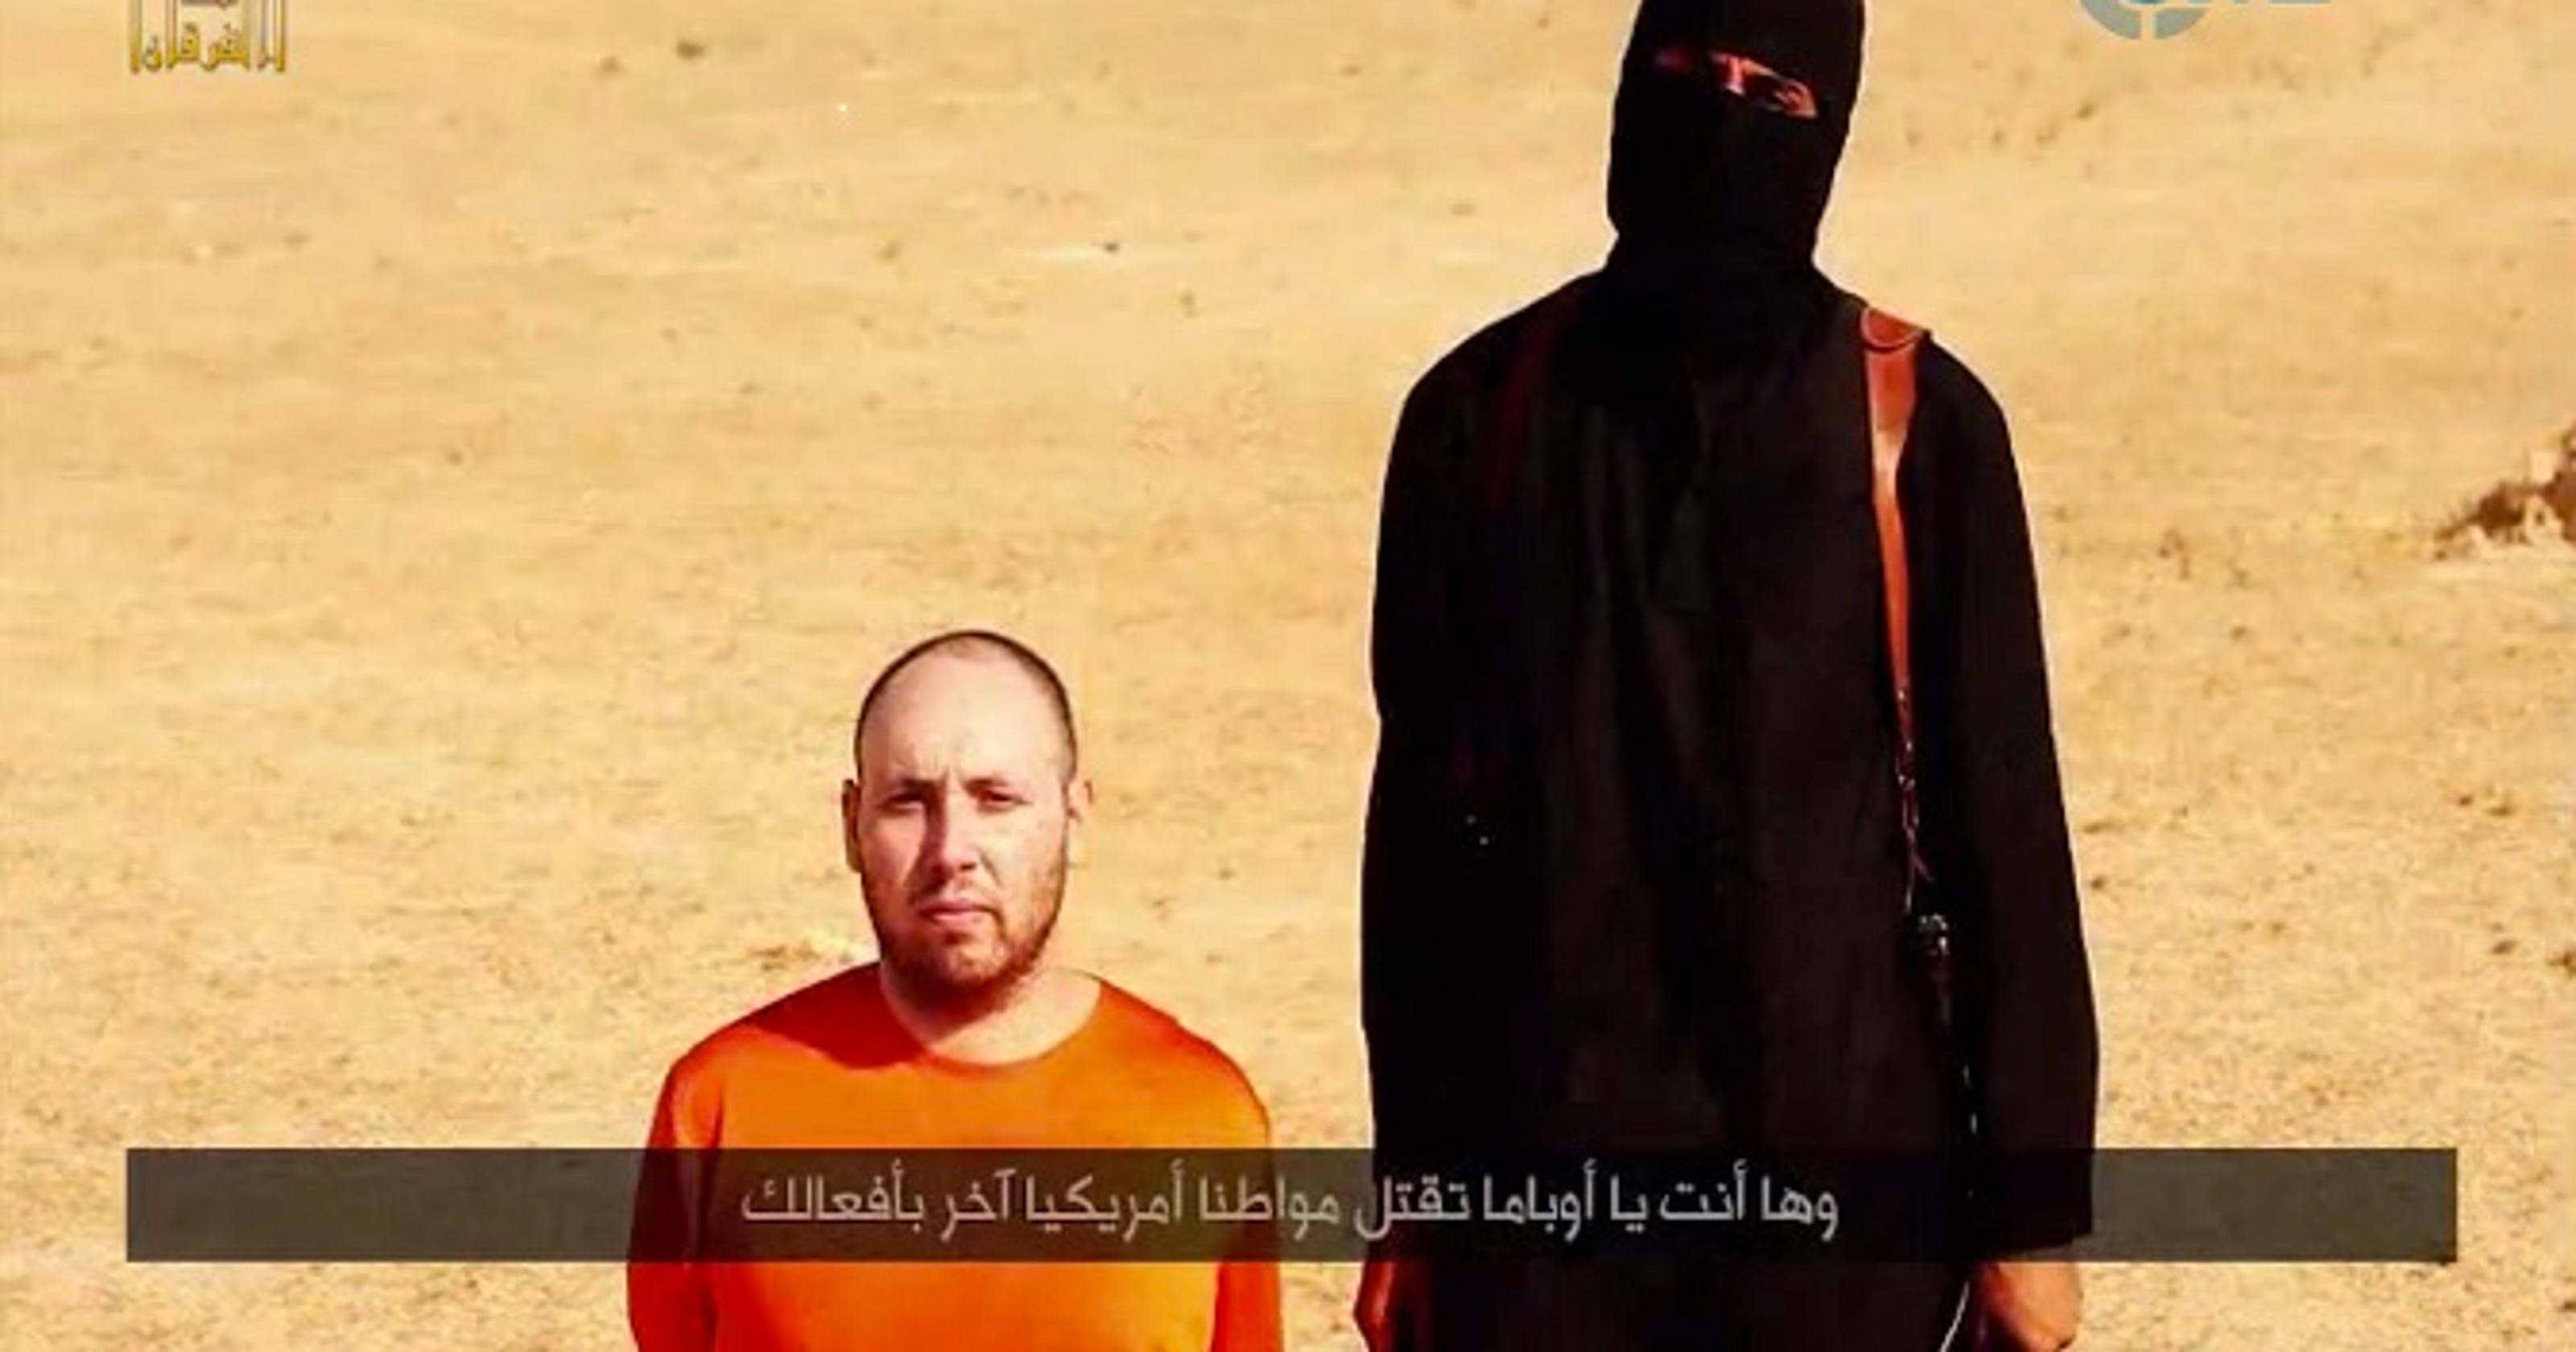 Islamic State Releases Video Depicting Another Beheading